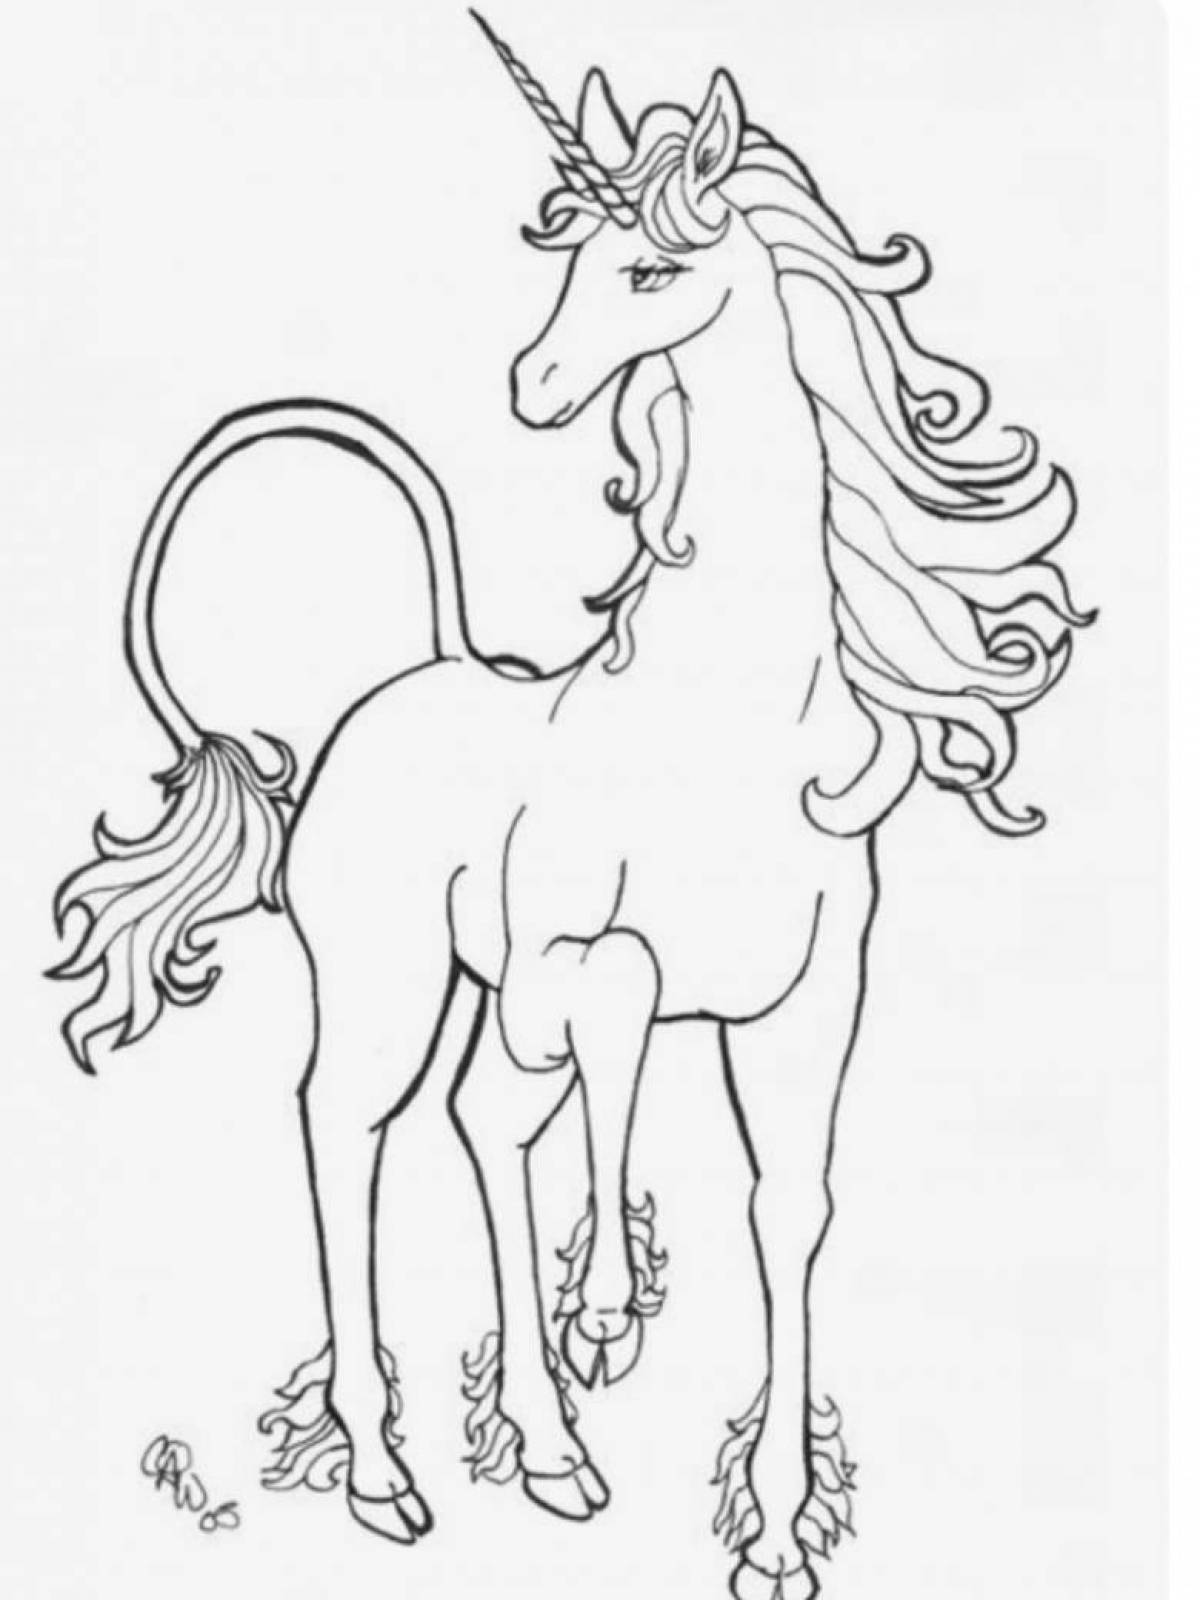 Fairytale coloring how to draw a unicorn